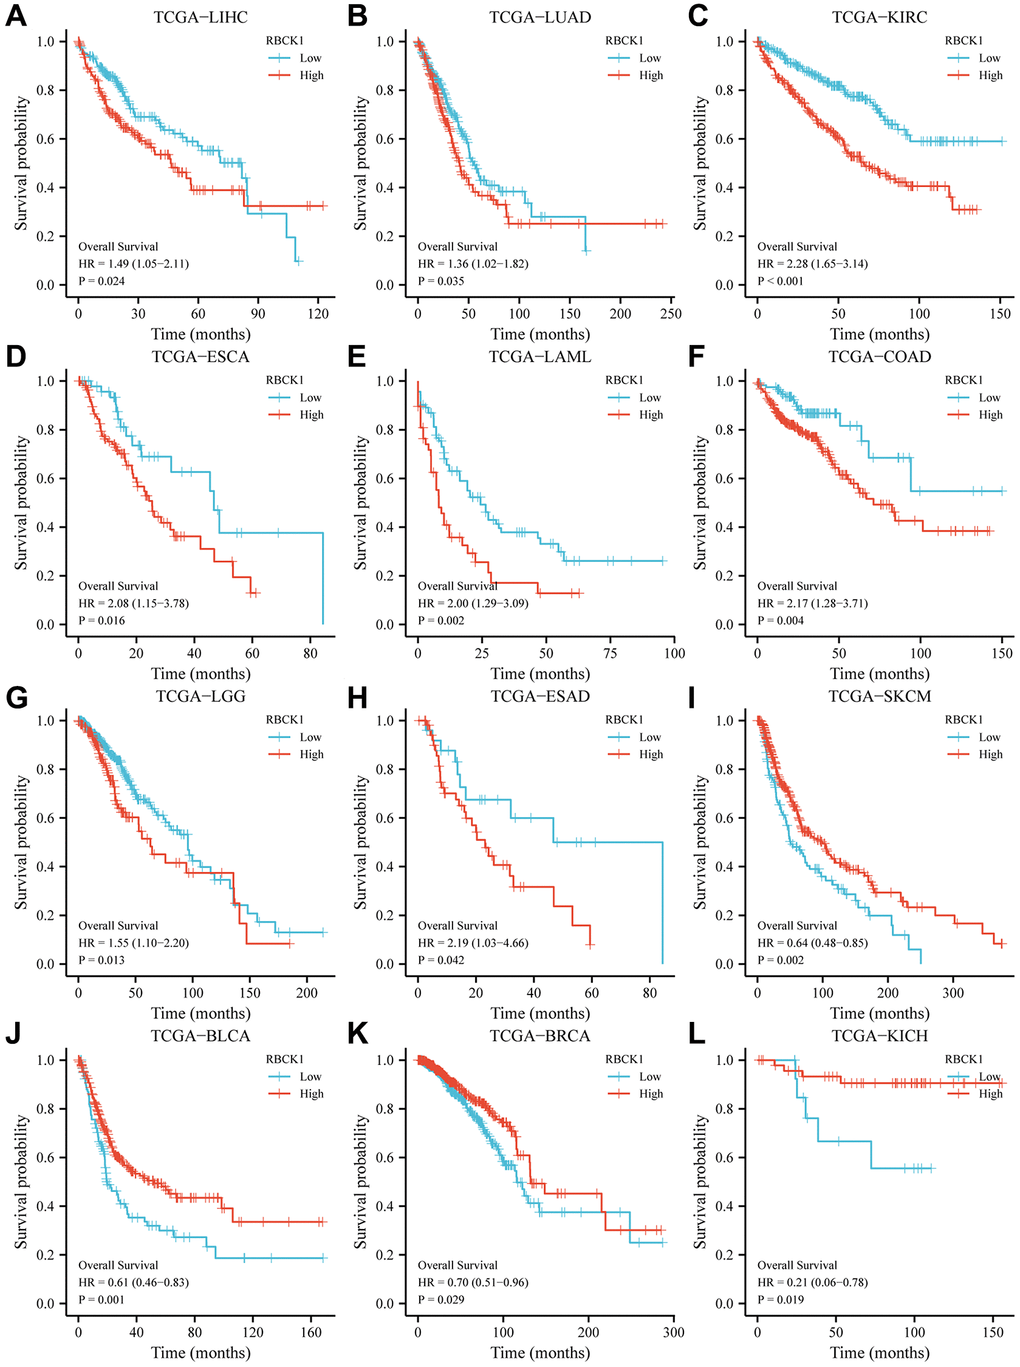 High RBCK1 expression is generally associated with poor prognosis in various carcinomas. Kaplan-Meier plots and statistical analysis based on the work of the TCGA Firehose Legacy study, showing the effect of increased RBCK mRNA expression within LIHC (A), LUAD (B), KIRC (C), ESCA (D), LAML (E), COAD (F), LGG (G), ESAD (H), SKCM (I), BLCA (J), BRCA (K) and KICH (L) on overall survival.